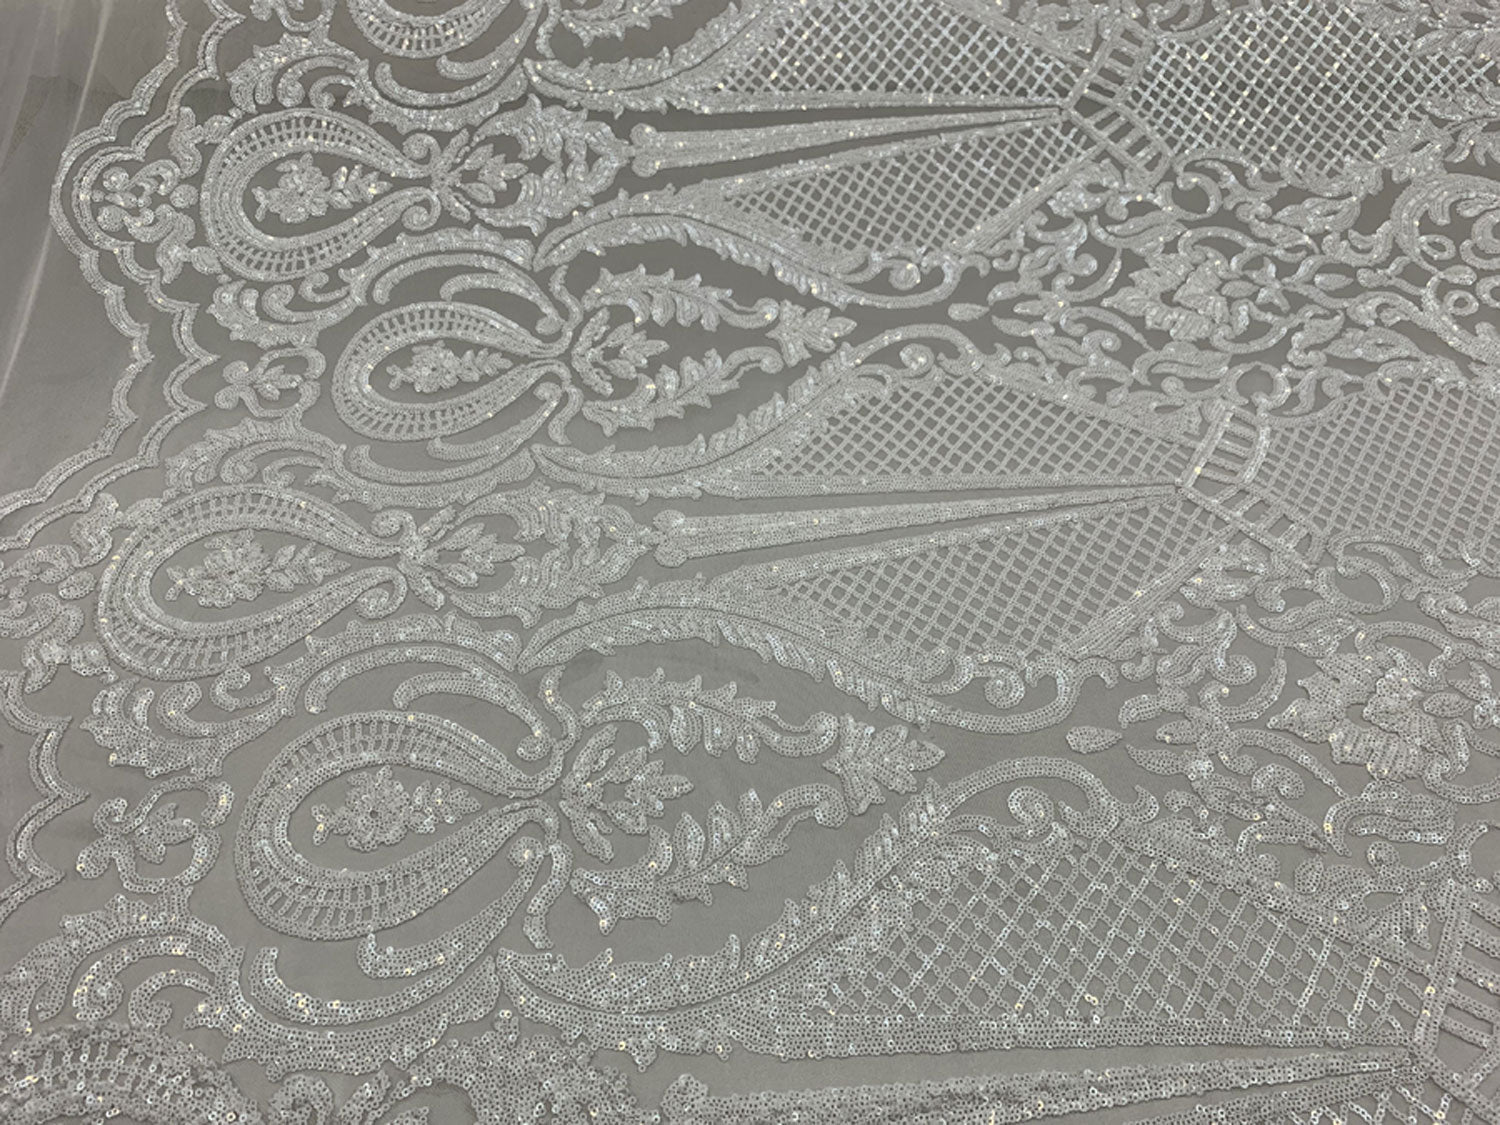 BY THE YARD/ Geometric Design Mesh Lace Fabric Sequins 4 Way Stretch On A White Mesh/Handmade Lace Embroider Prom/Gowns/Wedding DressICE FABRICSICE FABRICSGreenBY THE YARD/ Geometric Design Mesh Lace Fabric Sequins 4 Way Stretch On A White Mesh/Handmade Lace Embroider Prom/Gowns/Wedding Dress ICE FABRICS White